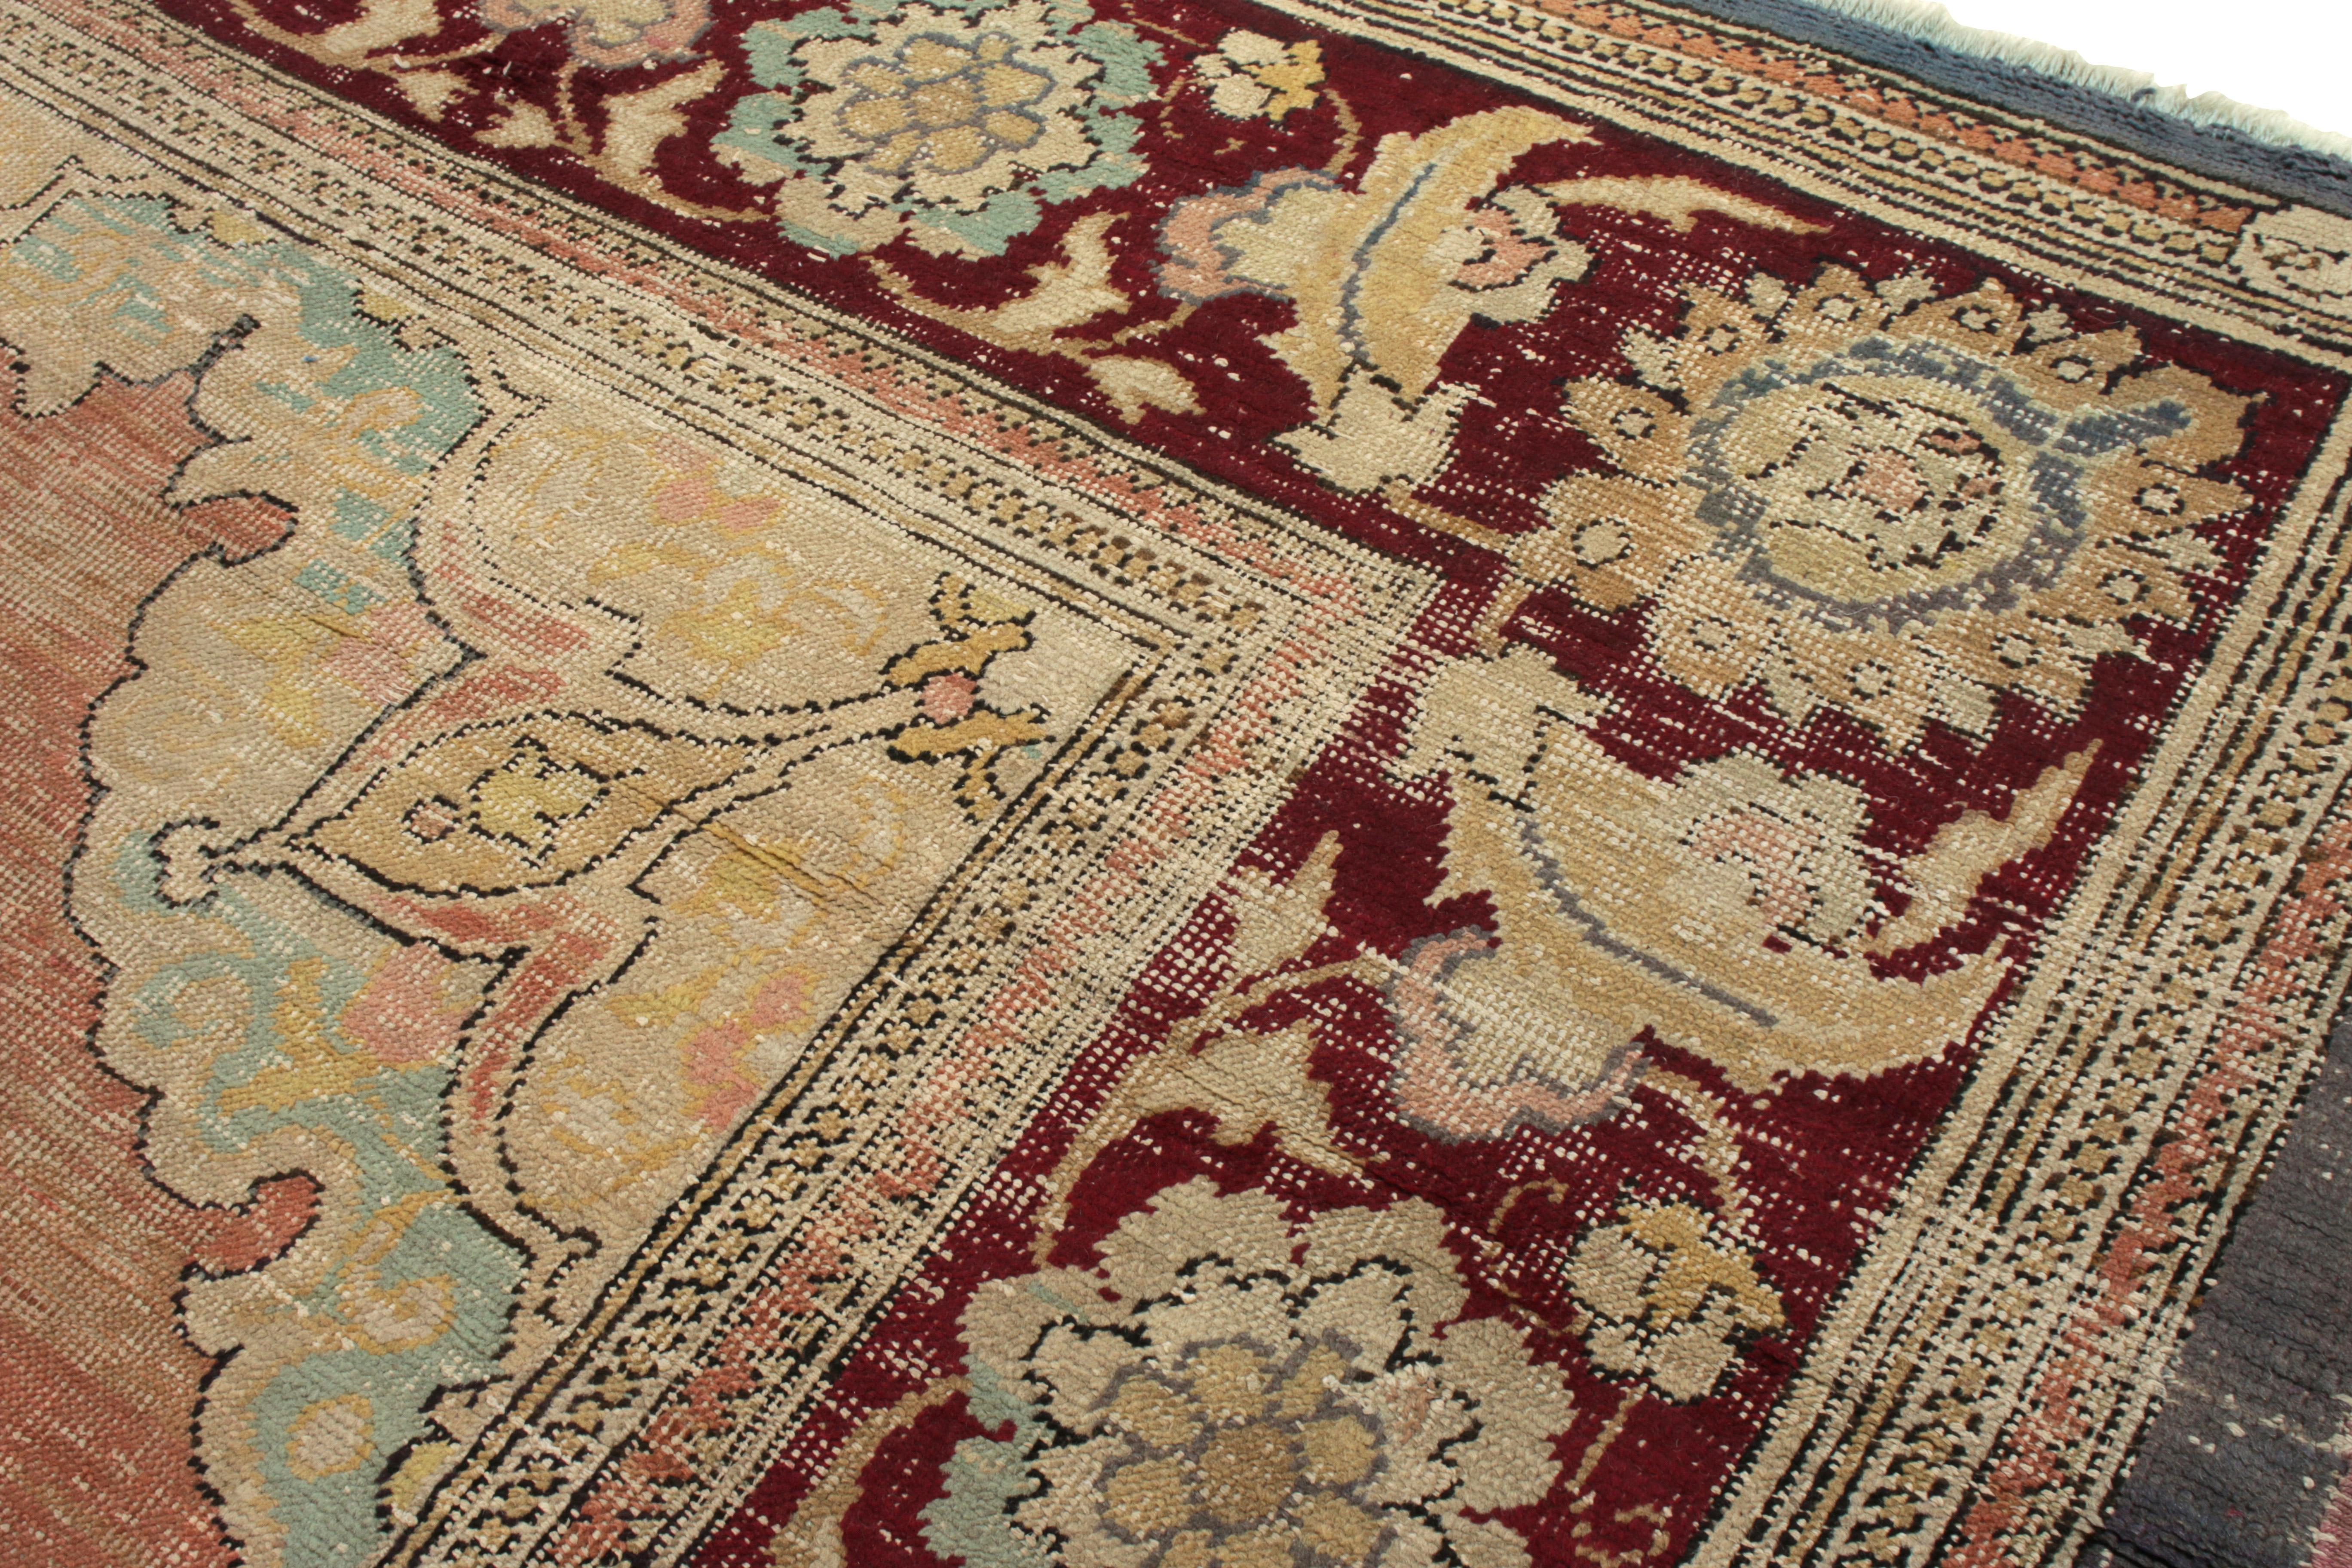 Antique Hereke Rug with Gold Floral Medallion and Red Border, by Rug & Kilim In Good Condition For Sale In Long Island City, NY